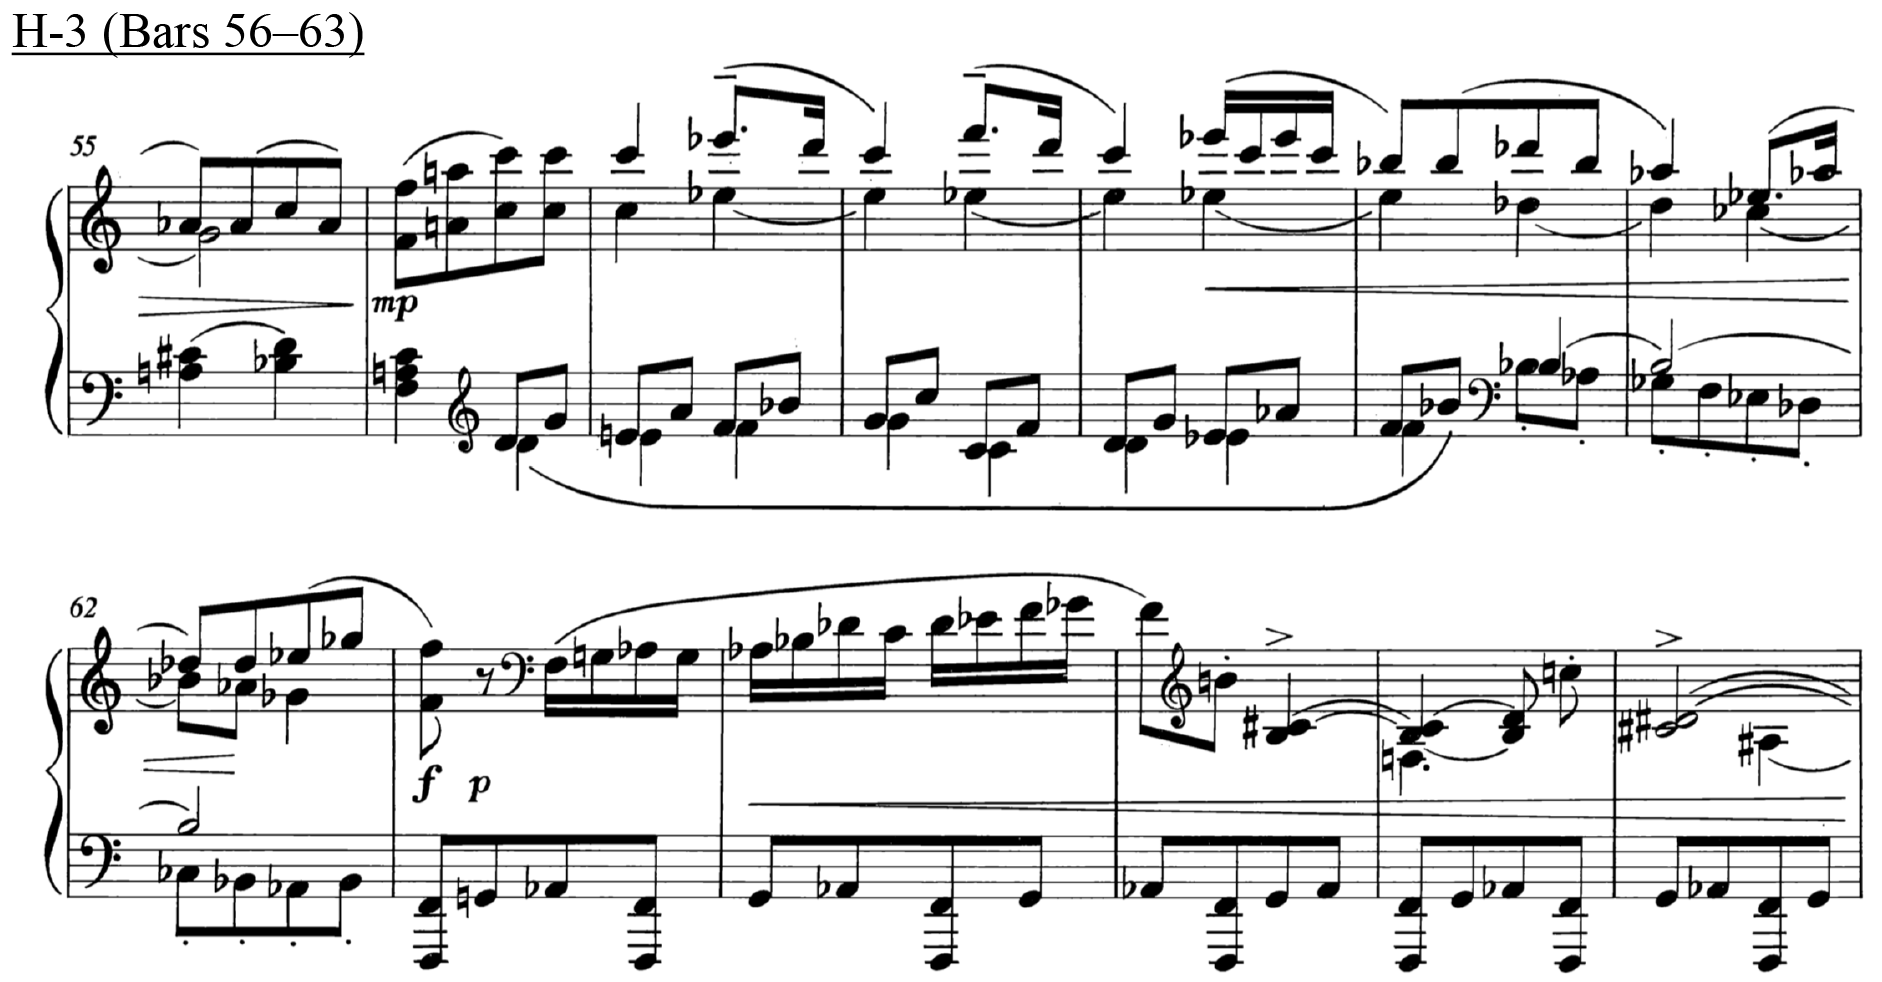 H-3 (Bars 56-63) contains two sets of staves with a treble and bass clef on each set.